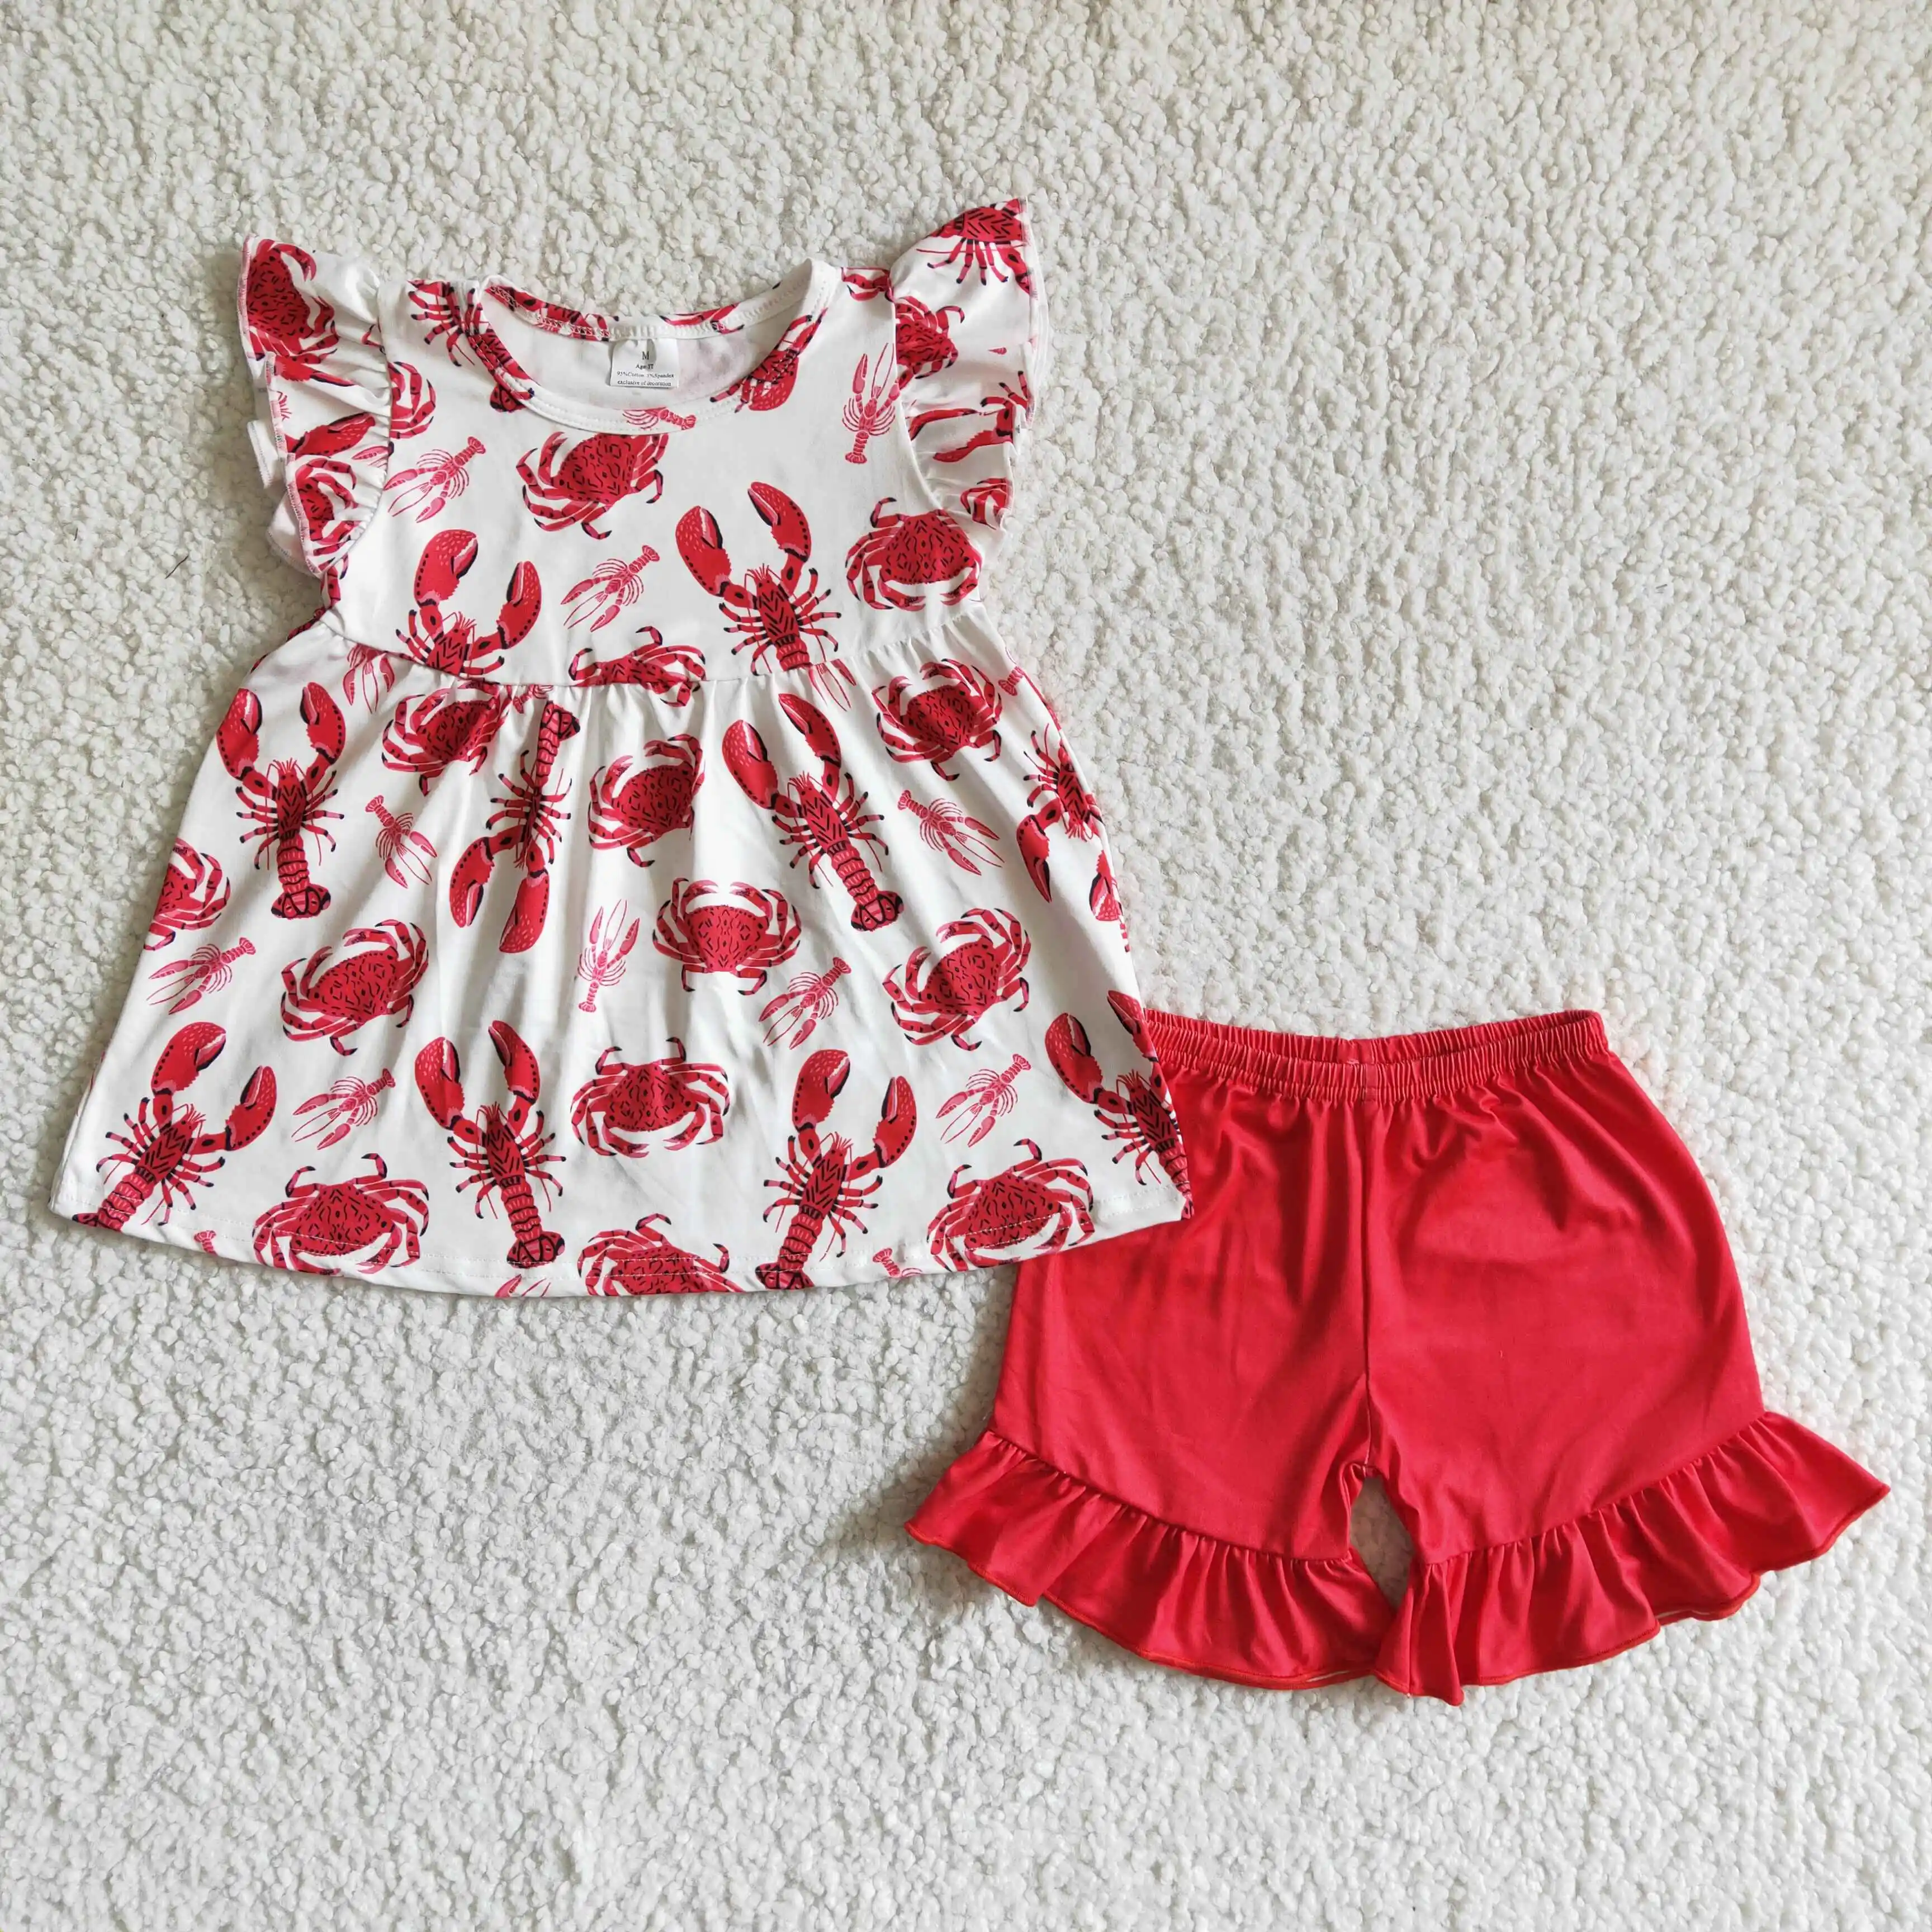 

RTS Baby Girls Crawfish Kids Children Boutique Outfits Flutter Sleeve Tunic Red Ruffle Shorts Kids Toddler Summer Clothing Sets